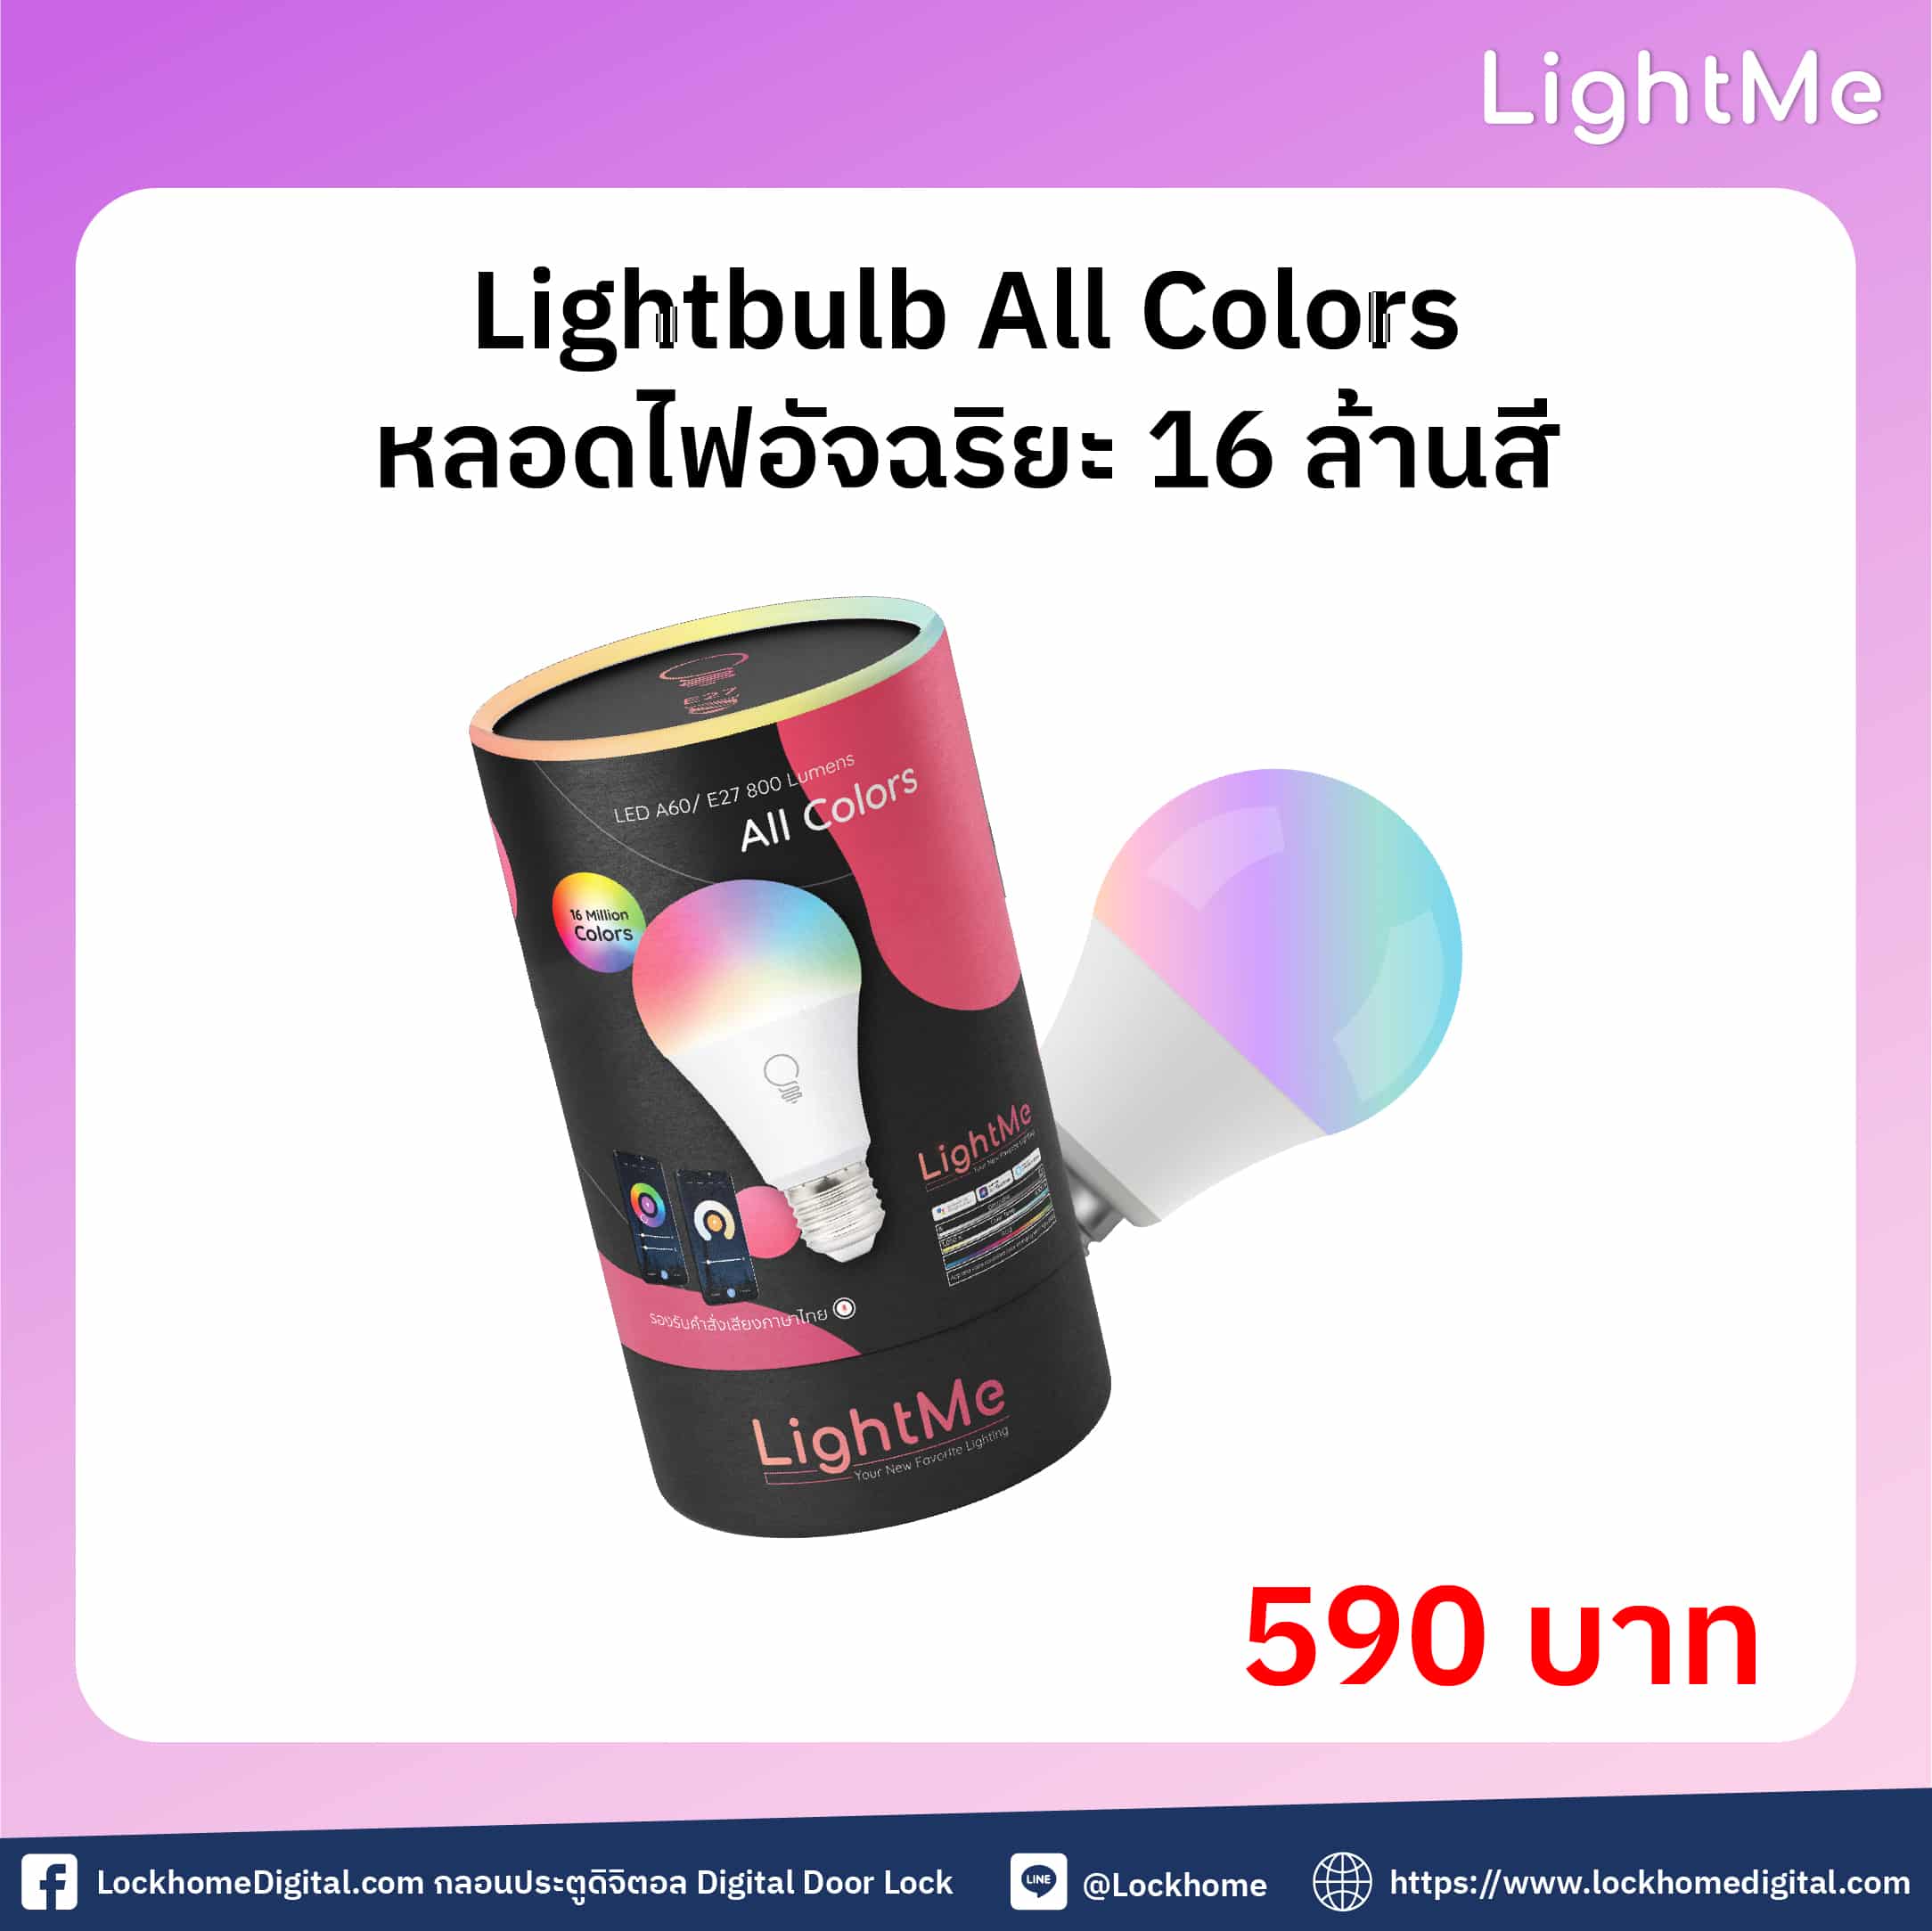 LightMe All Colors